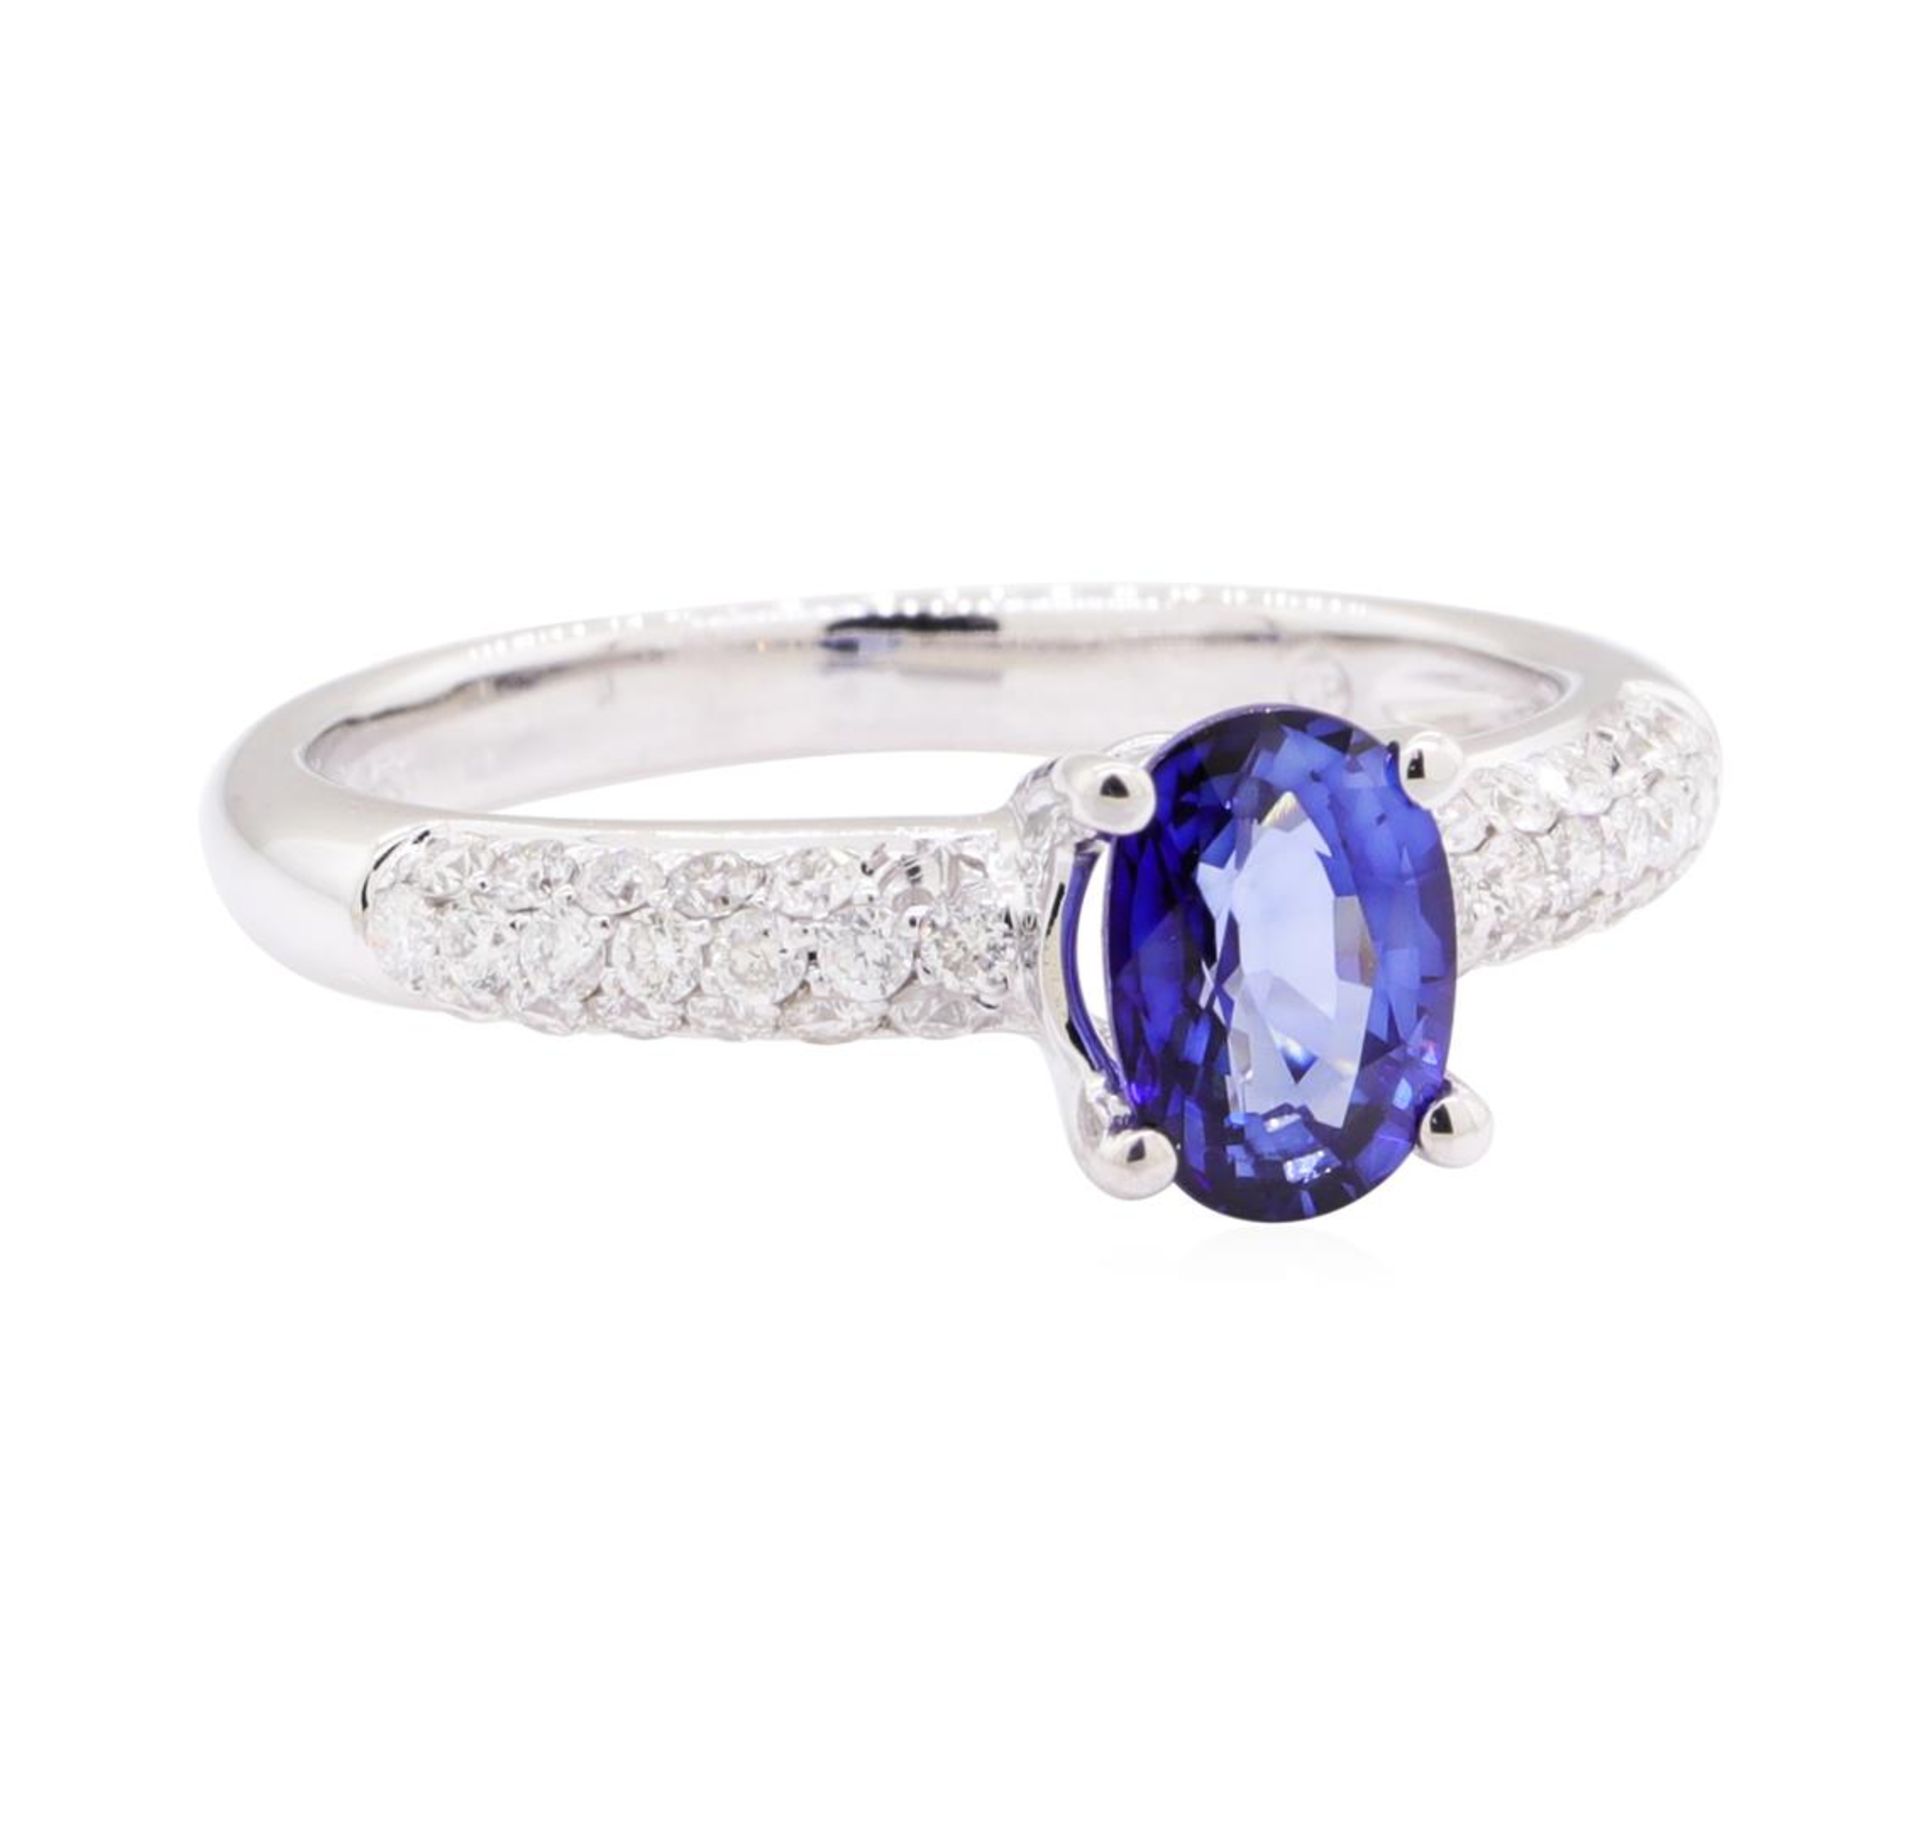 1.14ct Sapphire and Diamond Ring - 18KT White Gold